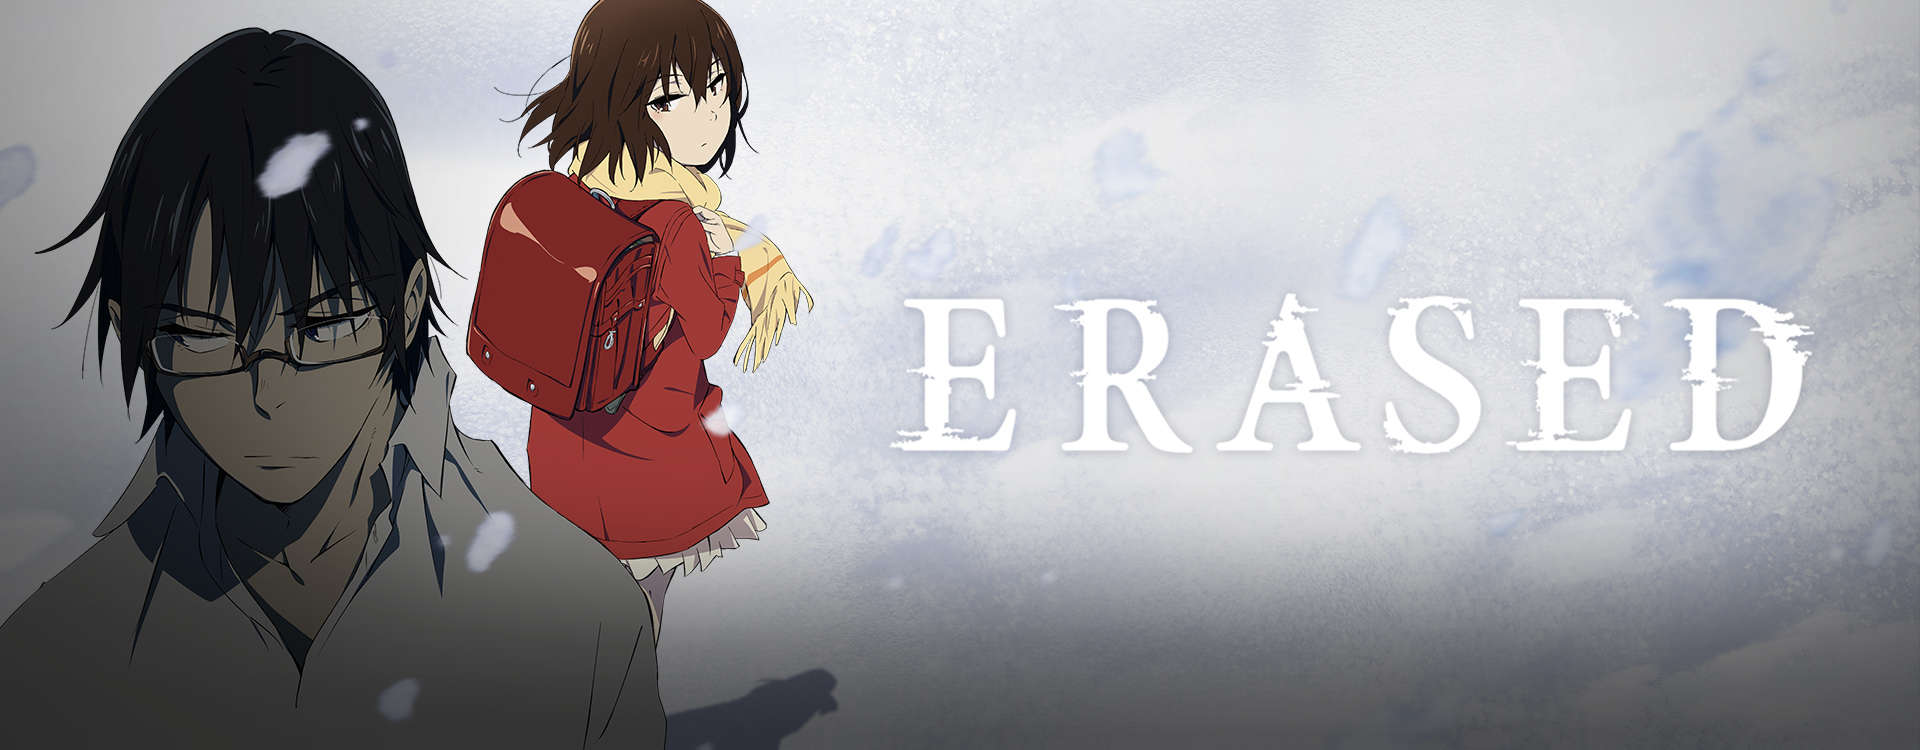 Petition · Petition To Change The Ending Of The ERASED Anime ·